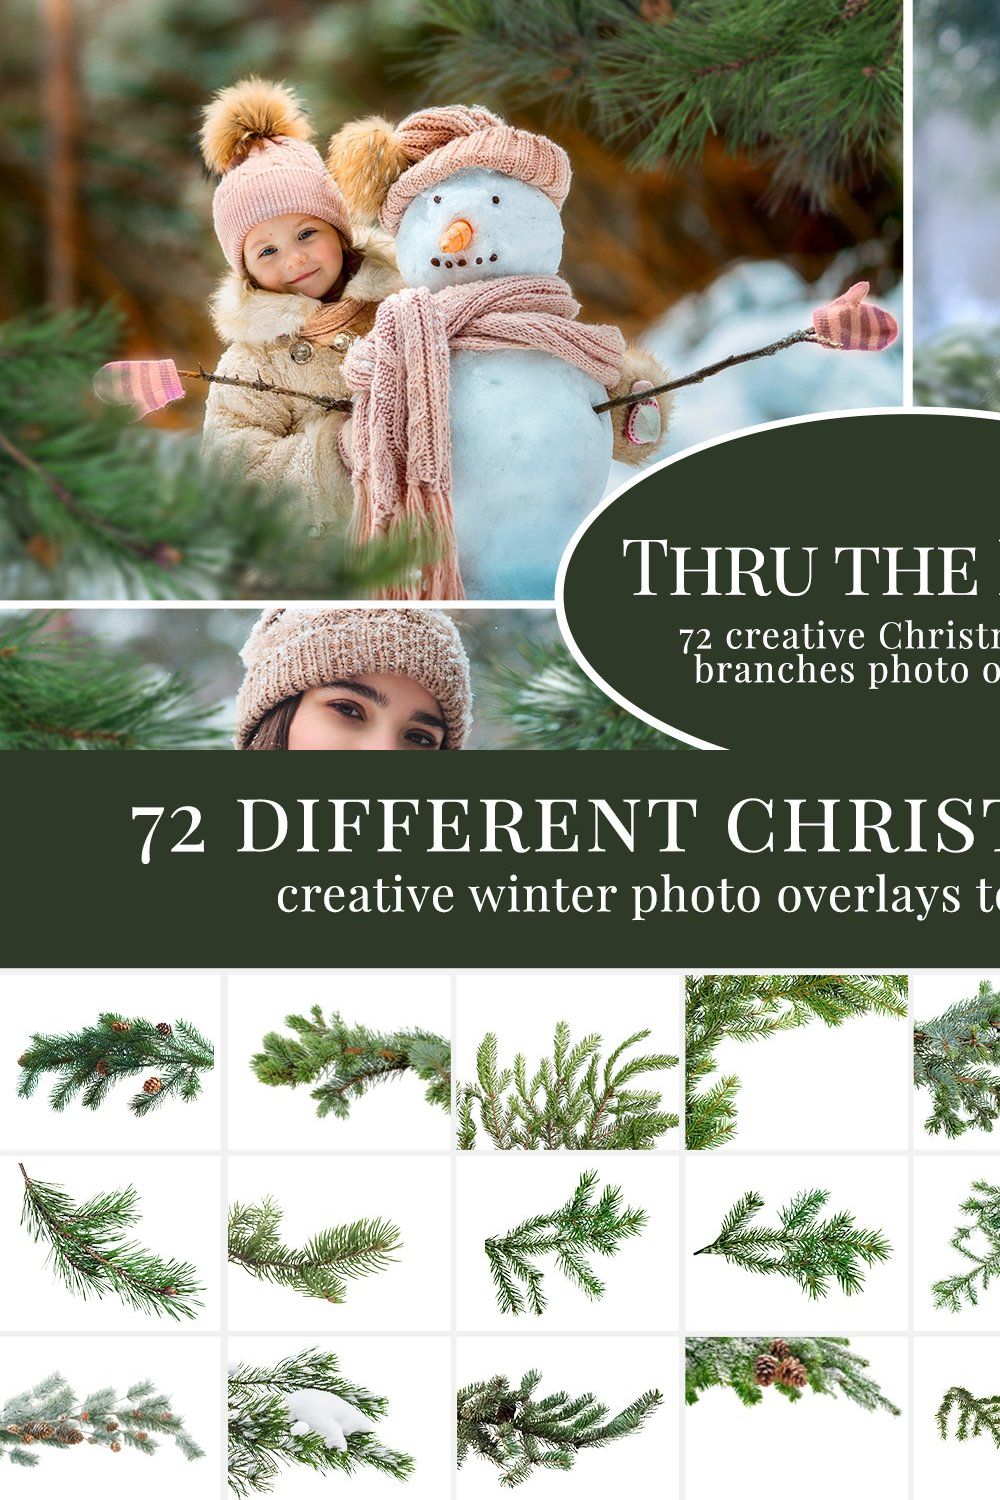 Thru the Pines photo overlays pinterest preview image.